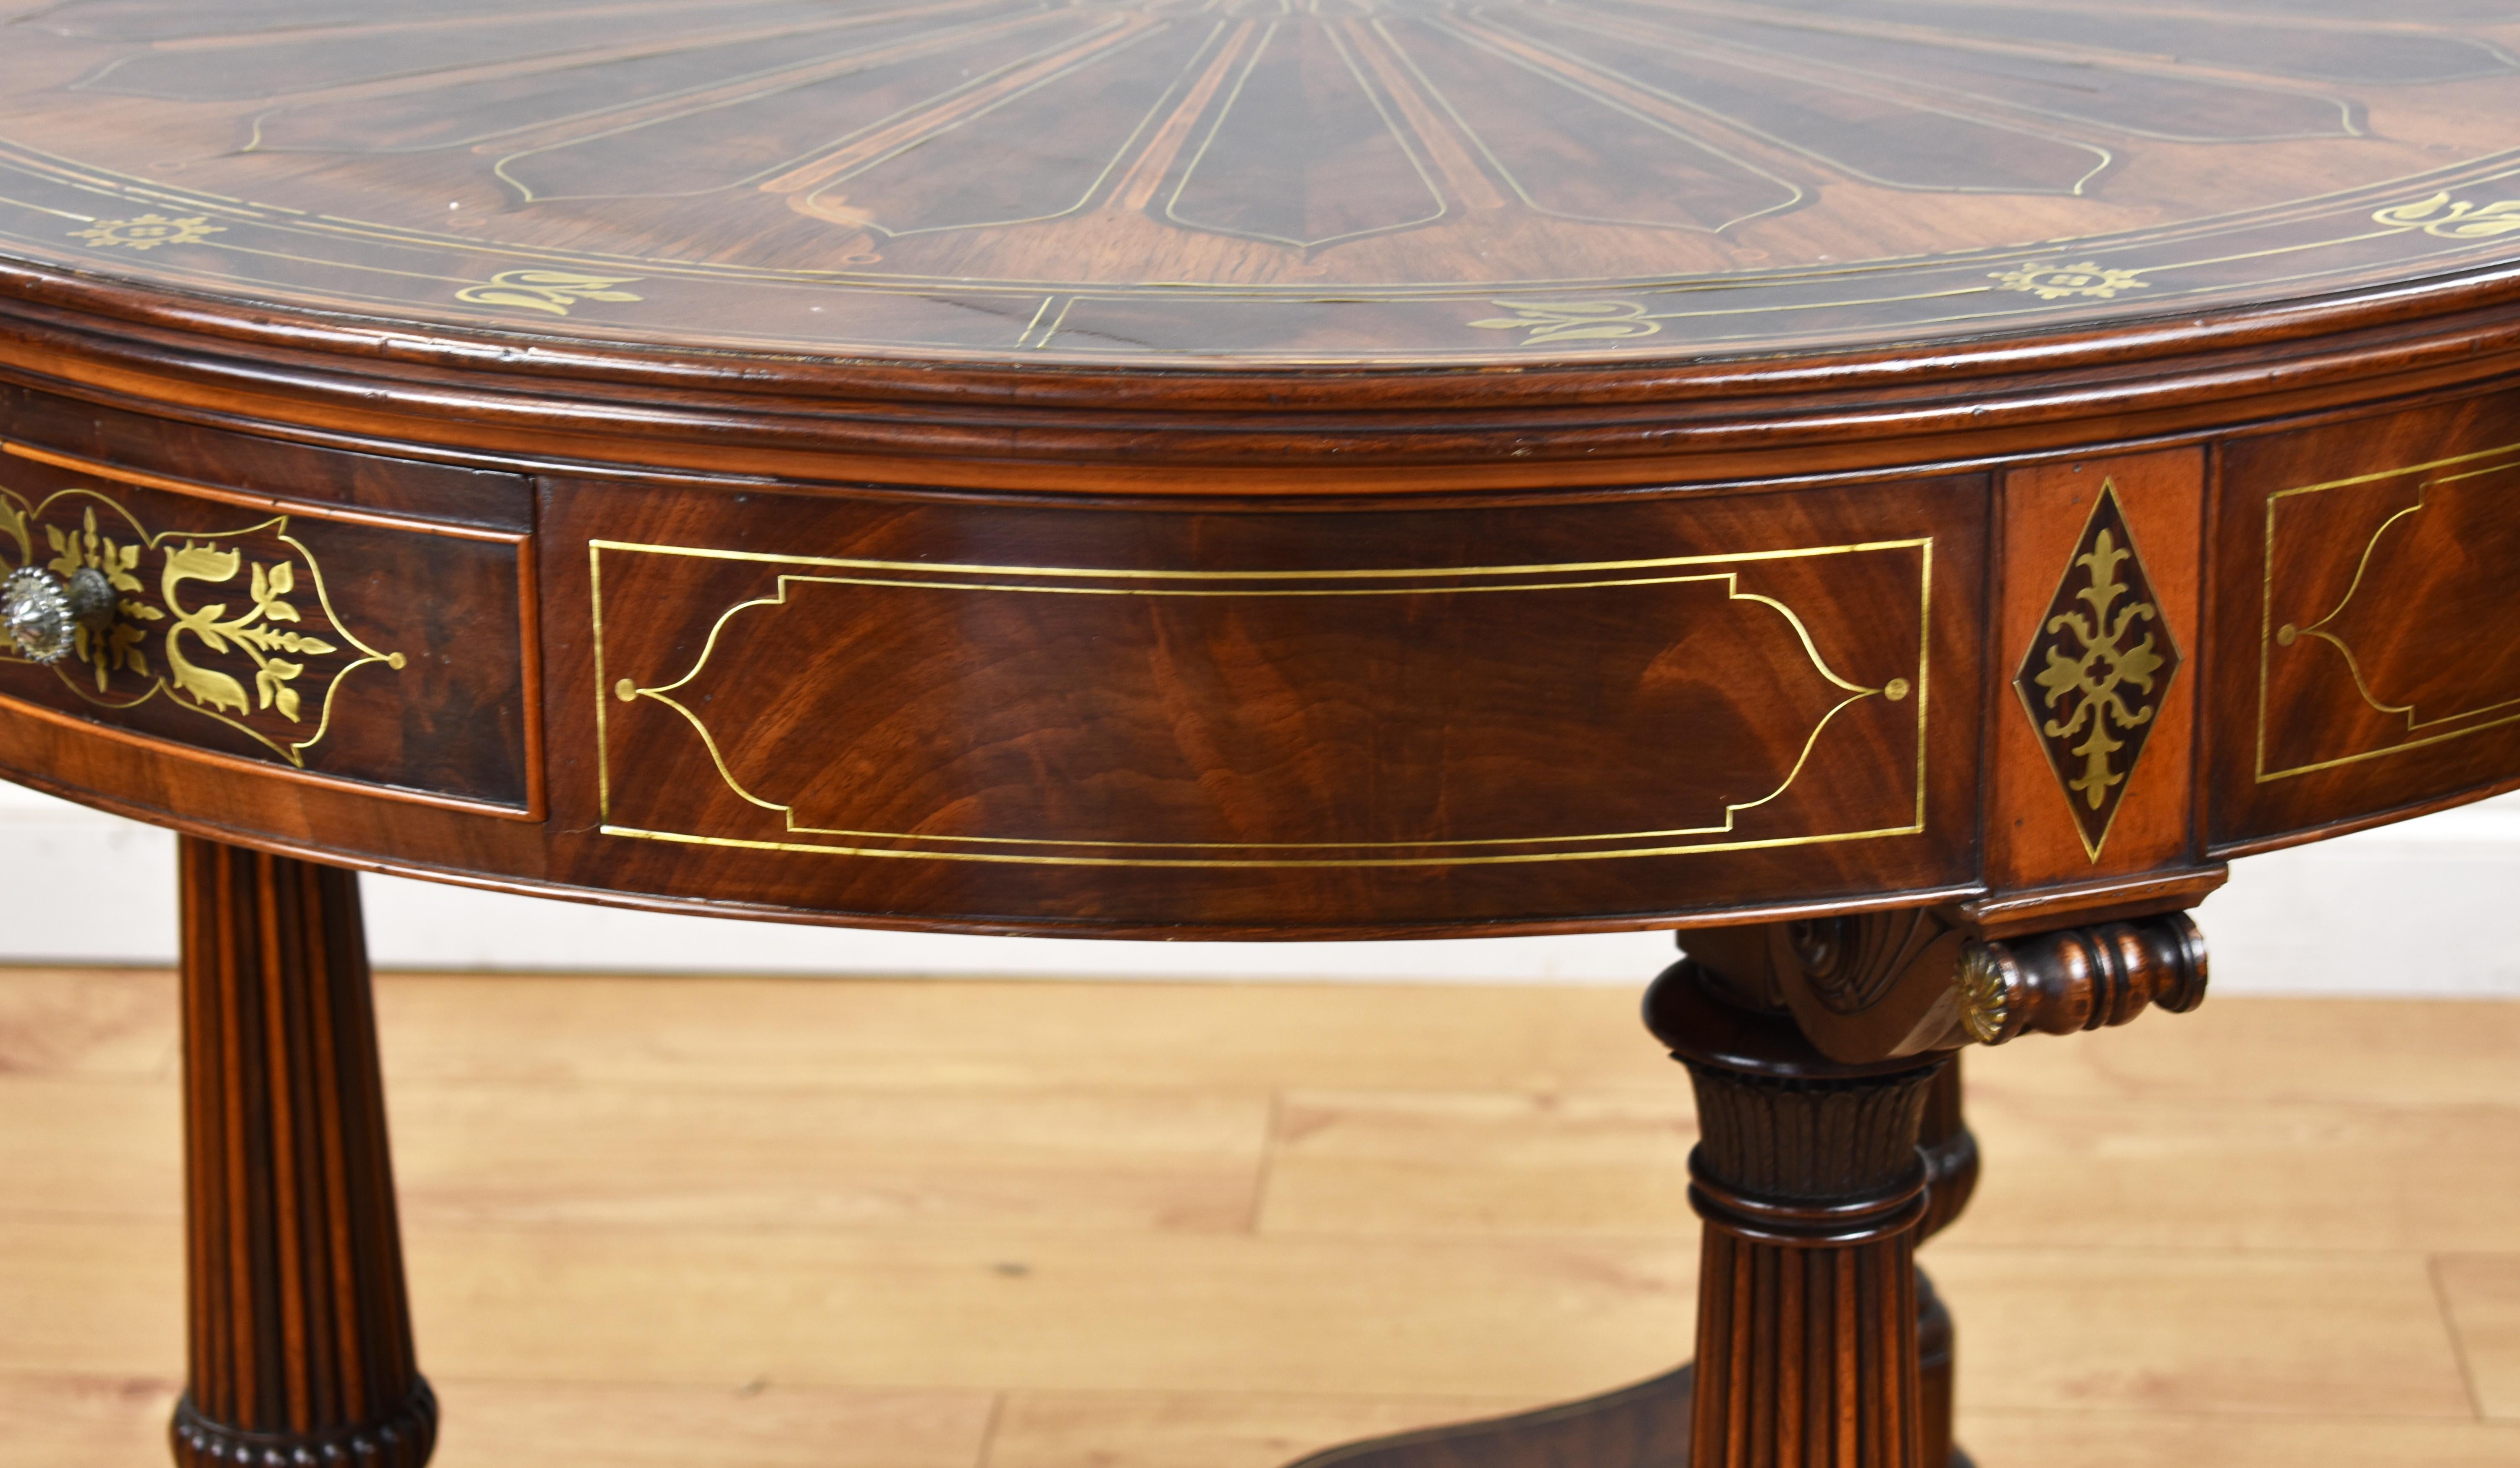 20th Century 19th Century English Regency Flame Mahogany Brass Inlaid Drum Table For Sale